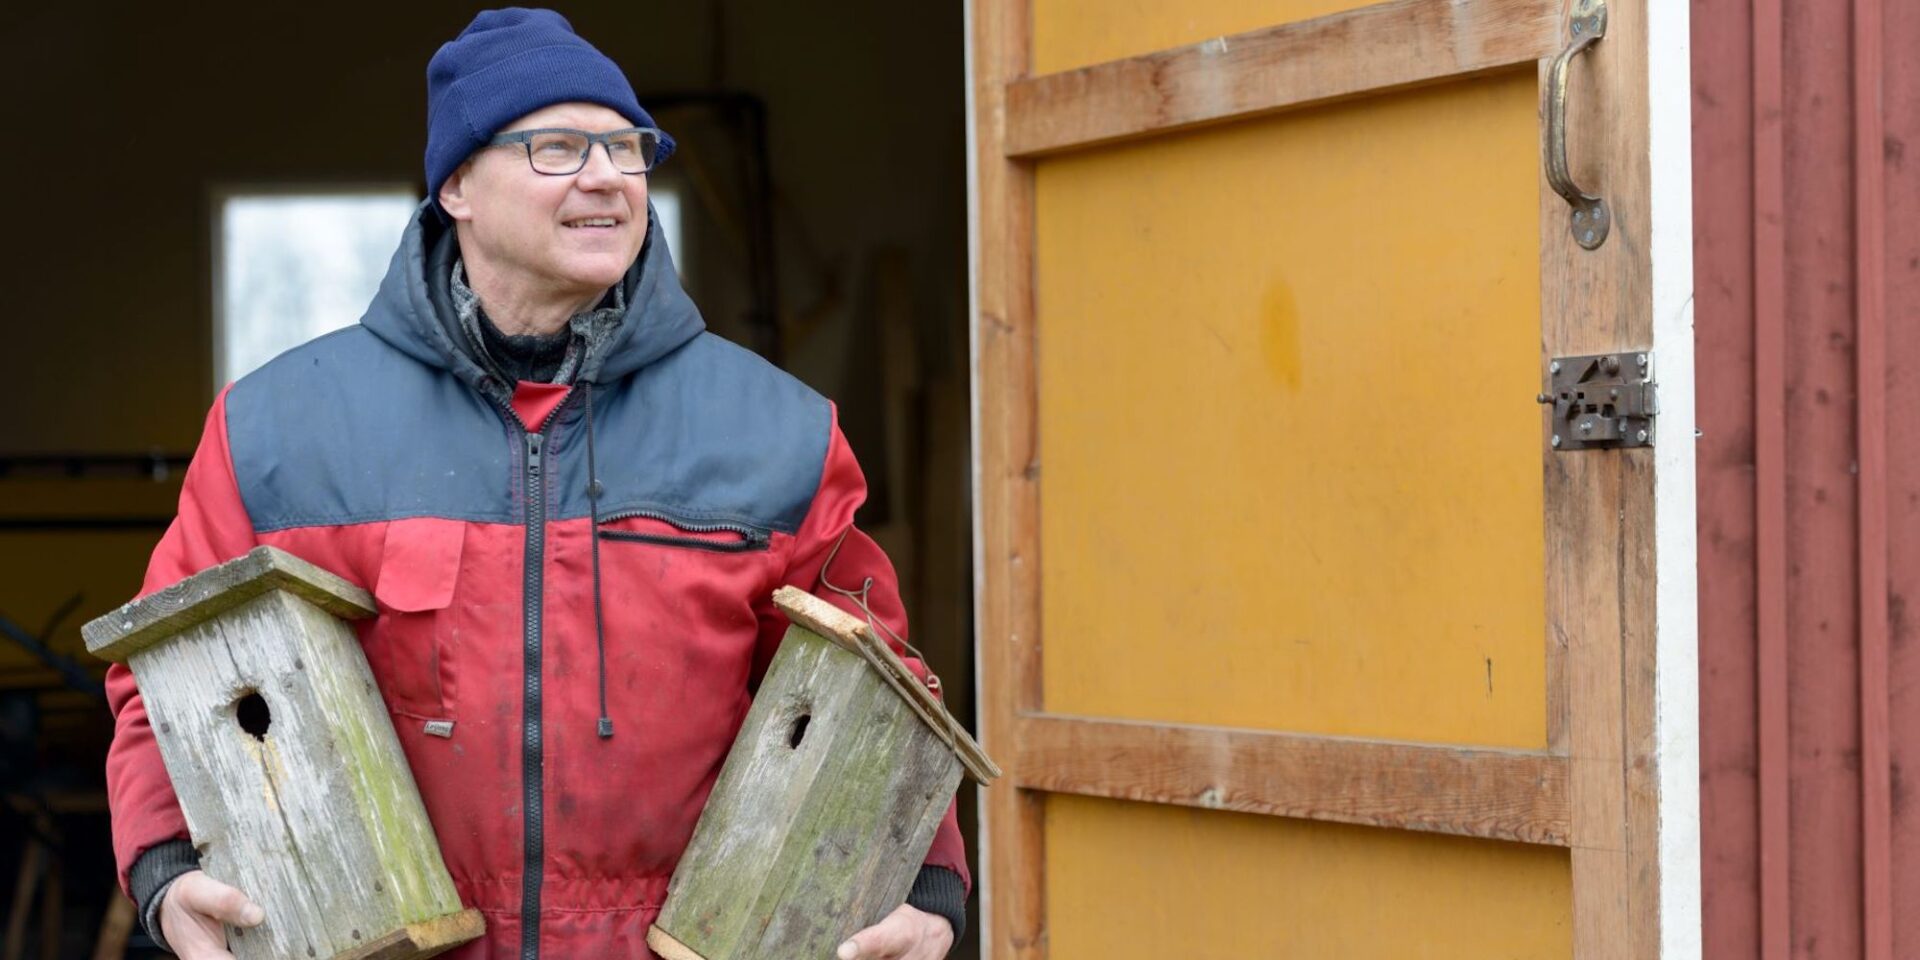 A photo showing a contented looking middle aged man coming out of his shed carrying two bird boxes.